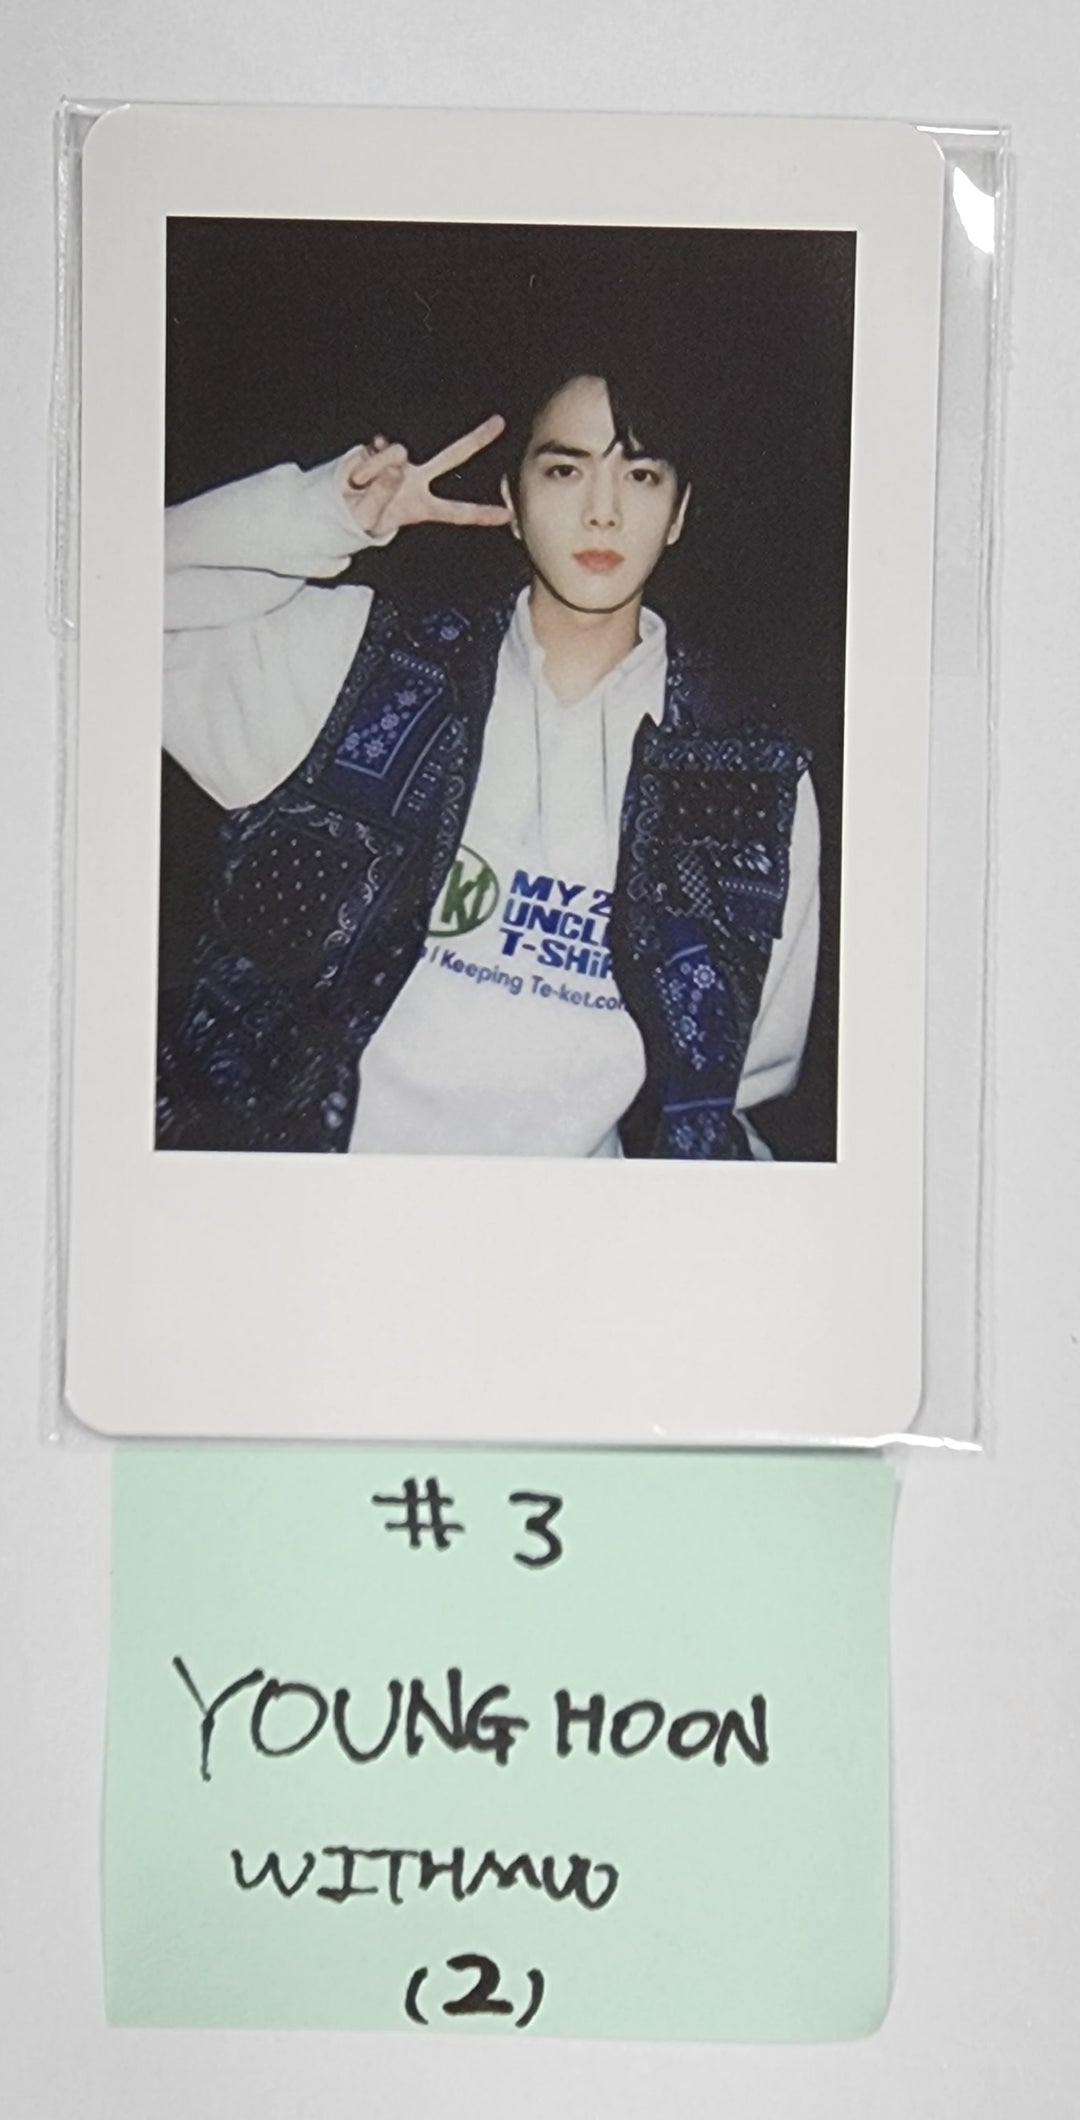 THE BOYZ "FAN CON : THE B-ROAD" - Withmuu MD Event Photocard [Updated 1/3]